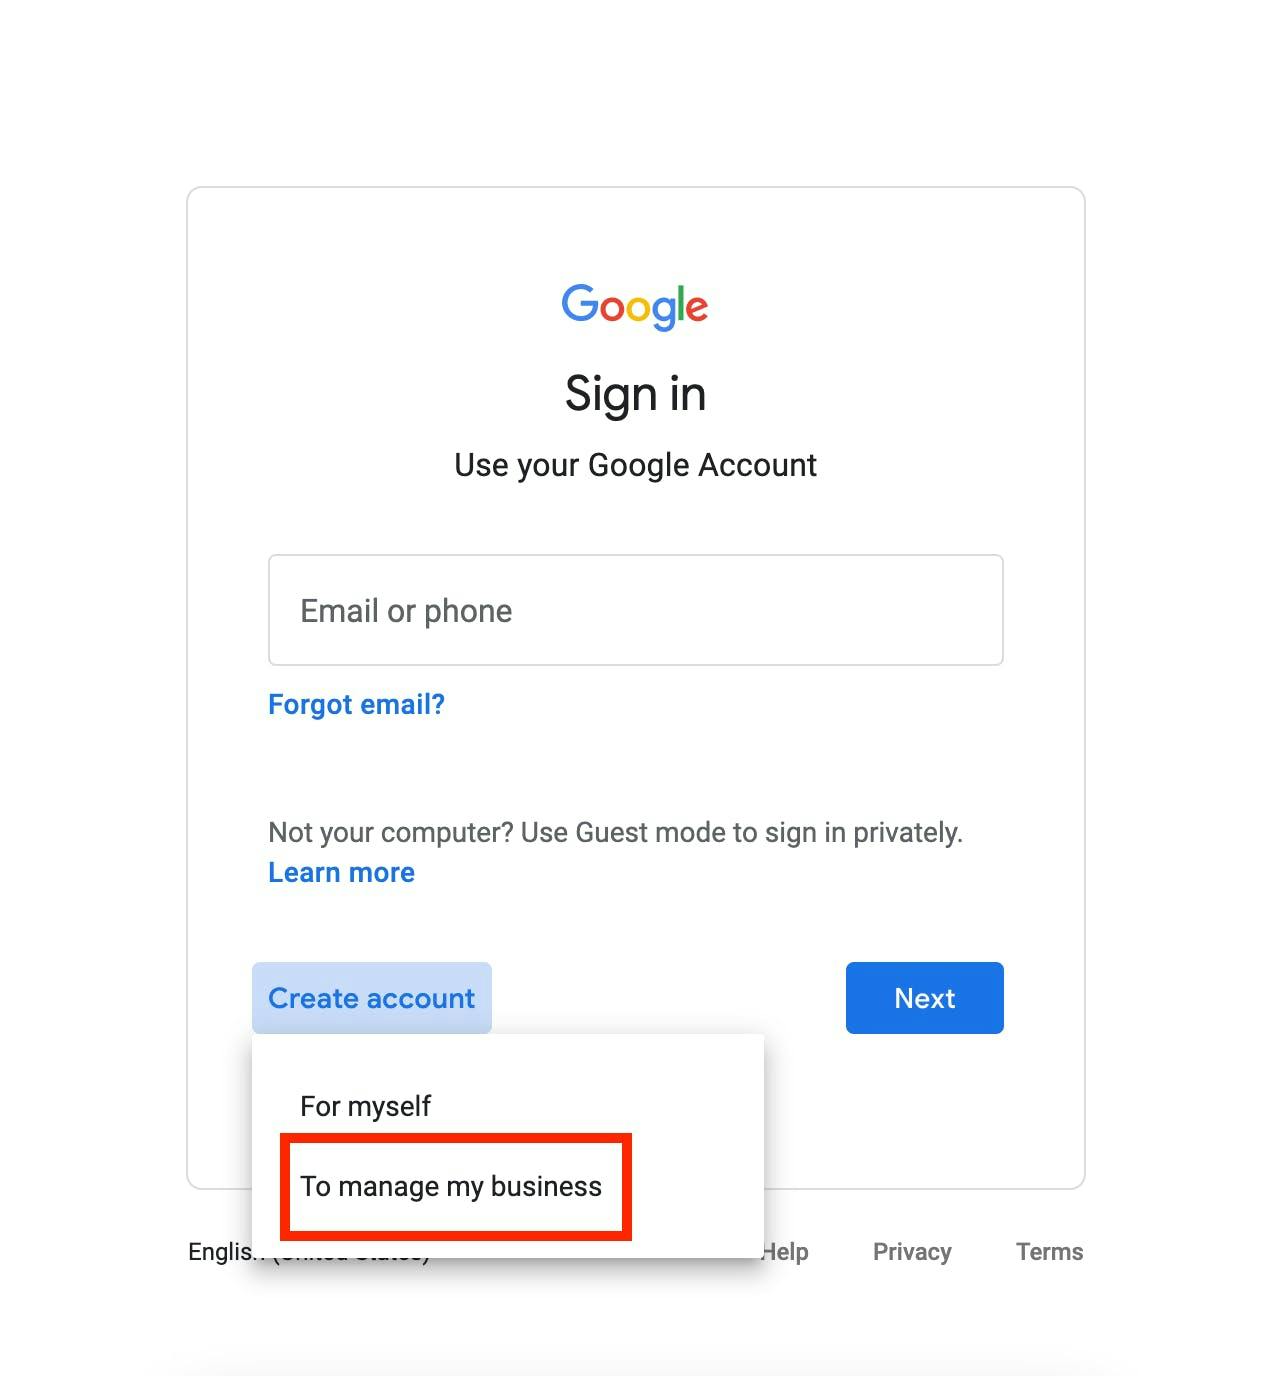 Google create account step 3 showing options to either create a personal account or a business account